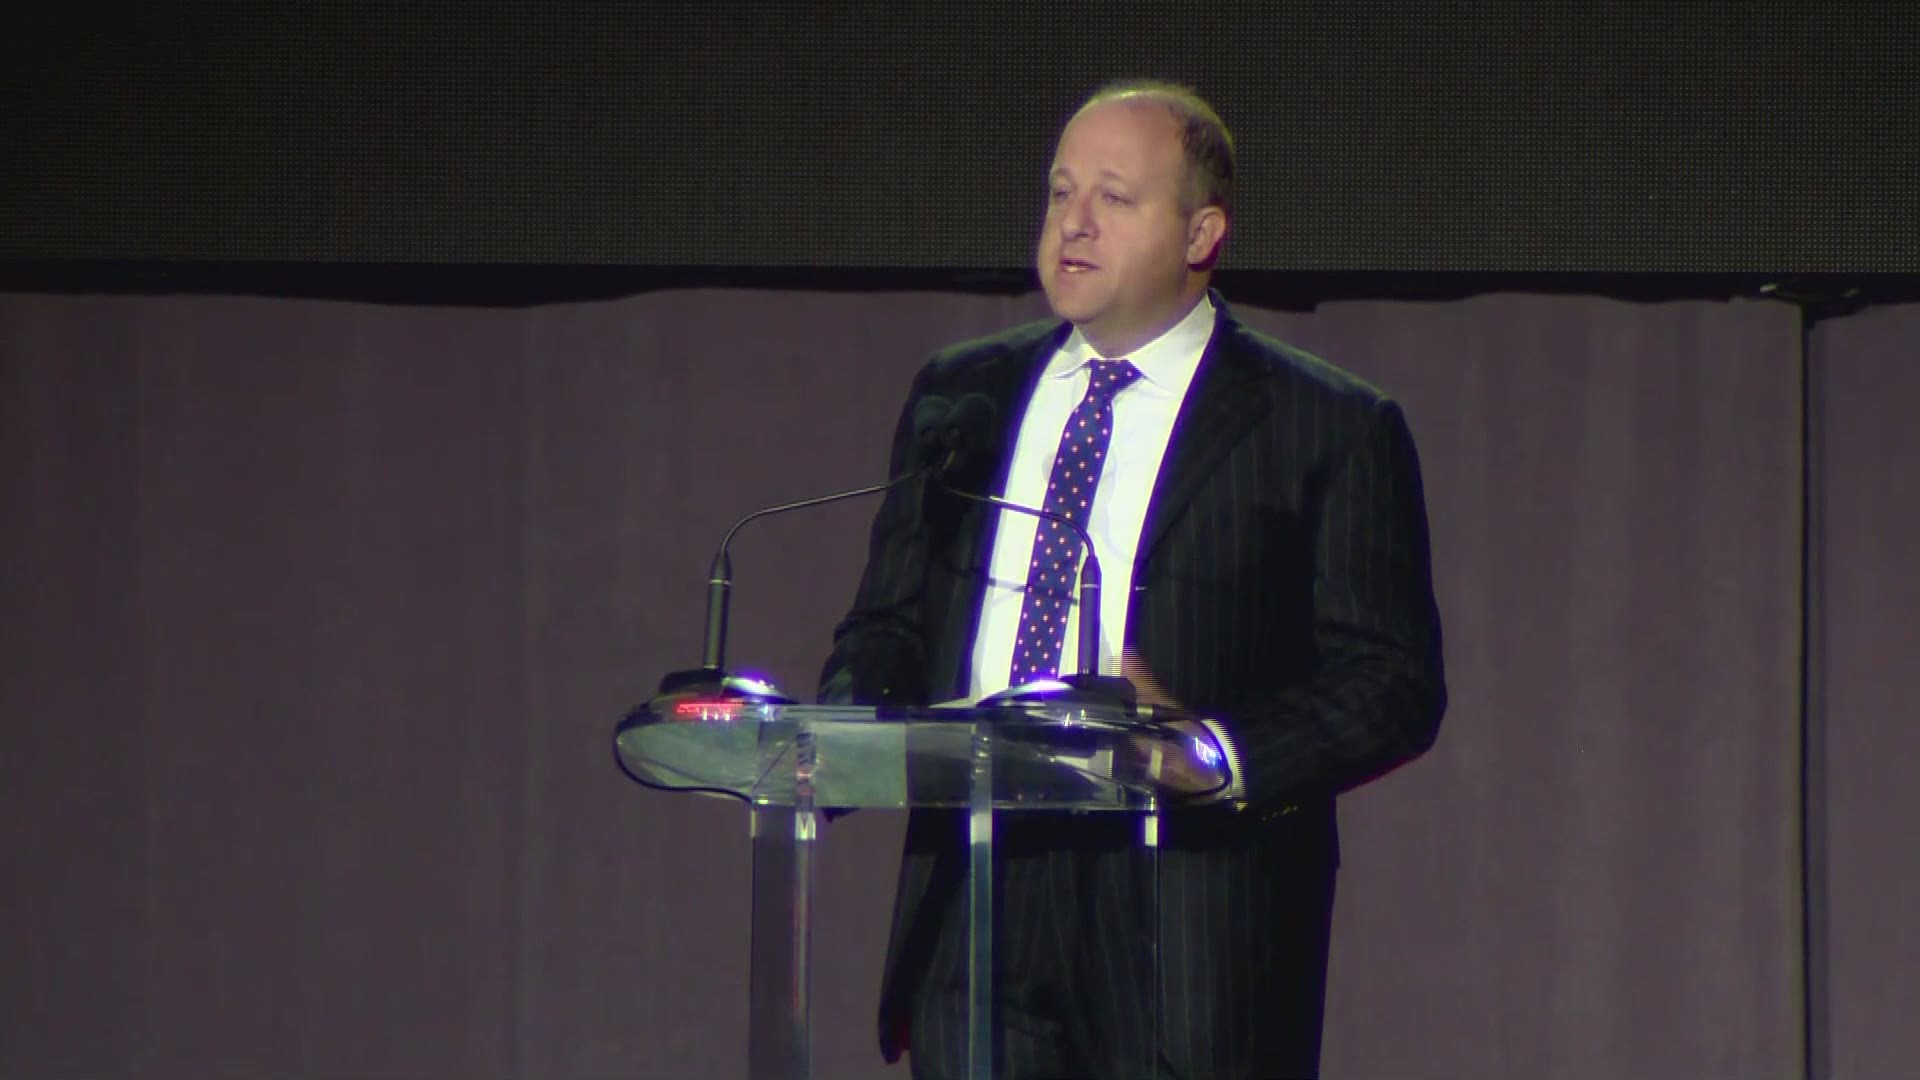 On Friday, Gov. Jared Polis became the first Democratic Governor of Colorado to speak at the convention in its 10-year history.